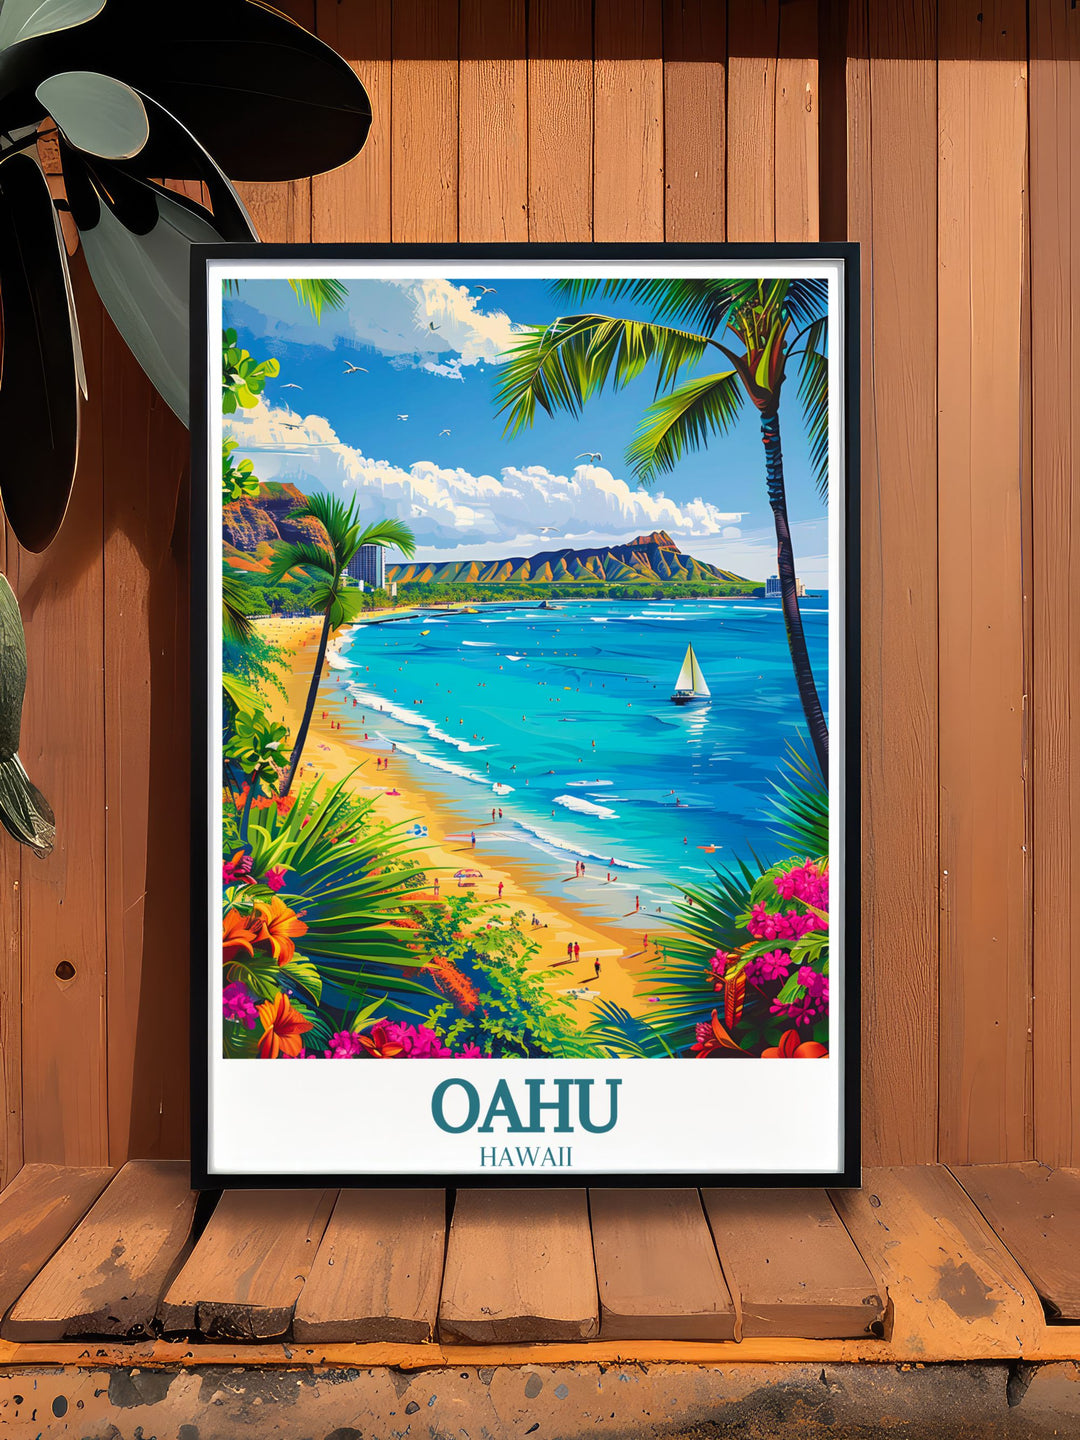 Stunning Oahu art print of Waikiki Beach and Diamond Head Crater brings the beauty of Hawaii into your decor a wonderful piece for creating a serene and tropical atmosphere.